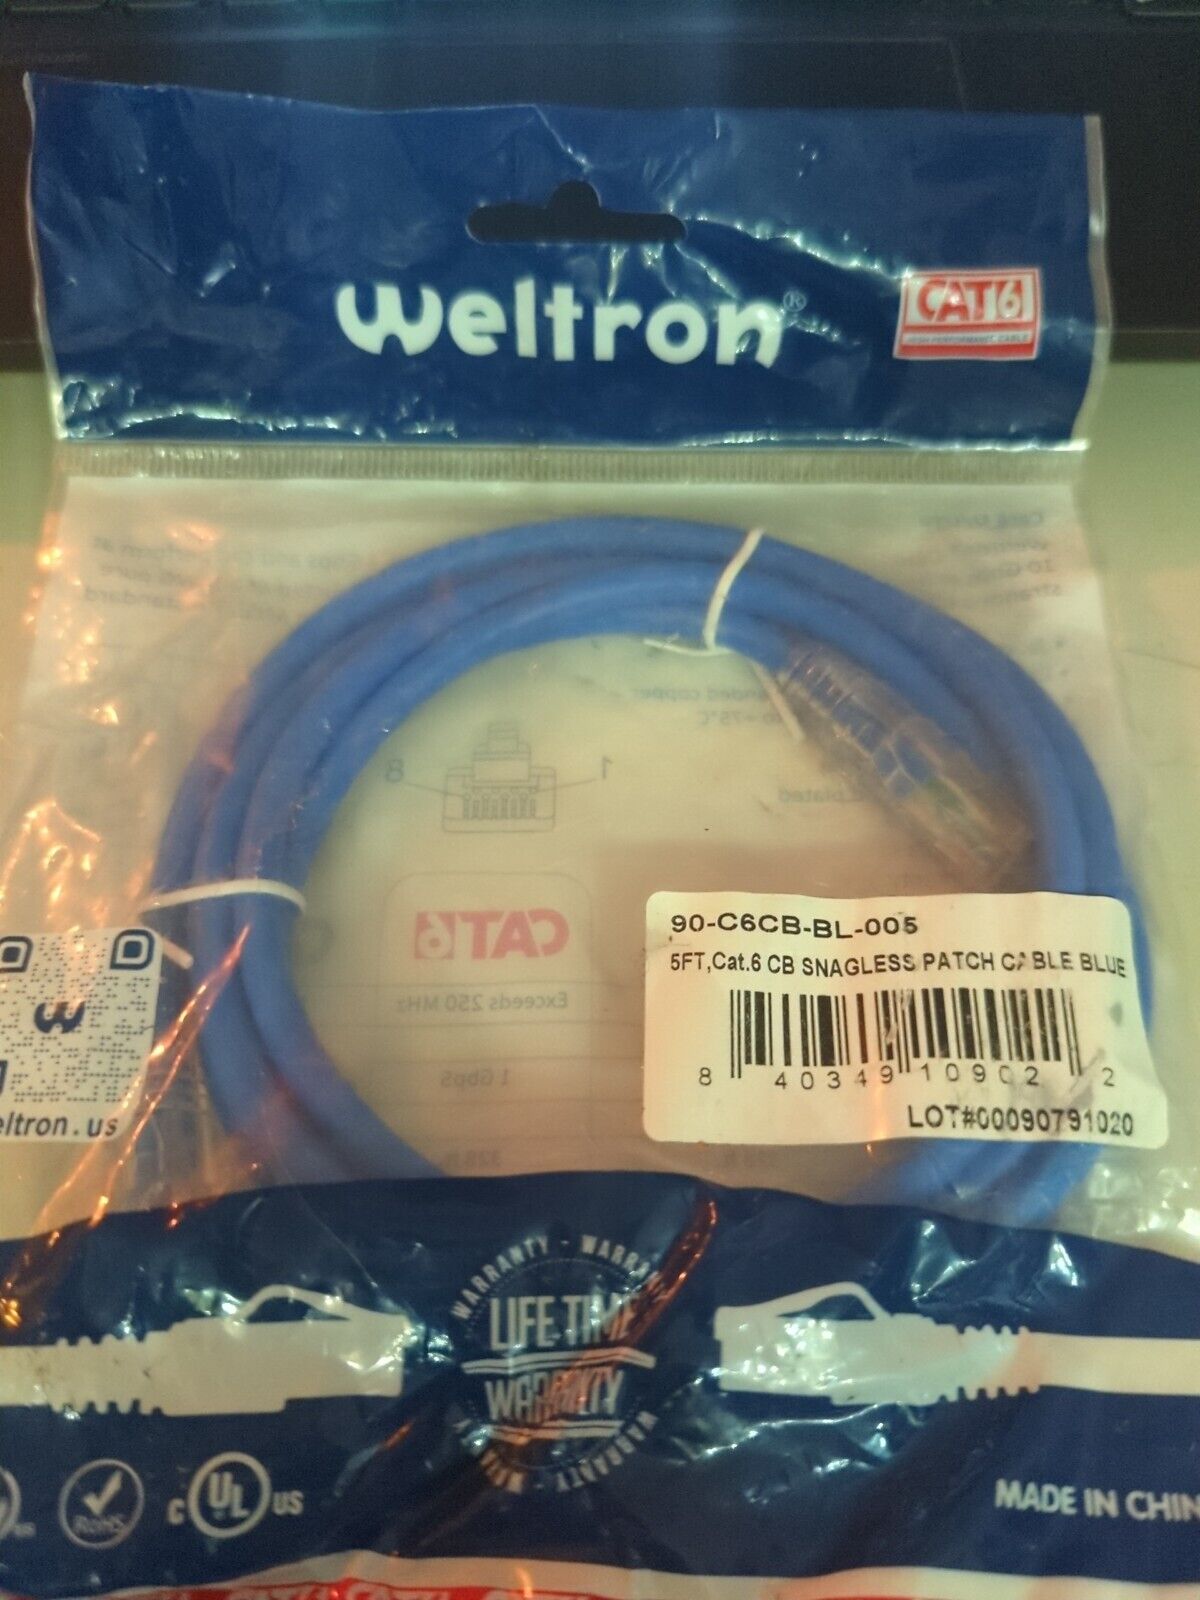 Weltron 5ft Cat 6 Patch Cable